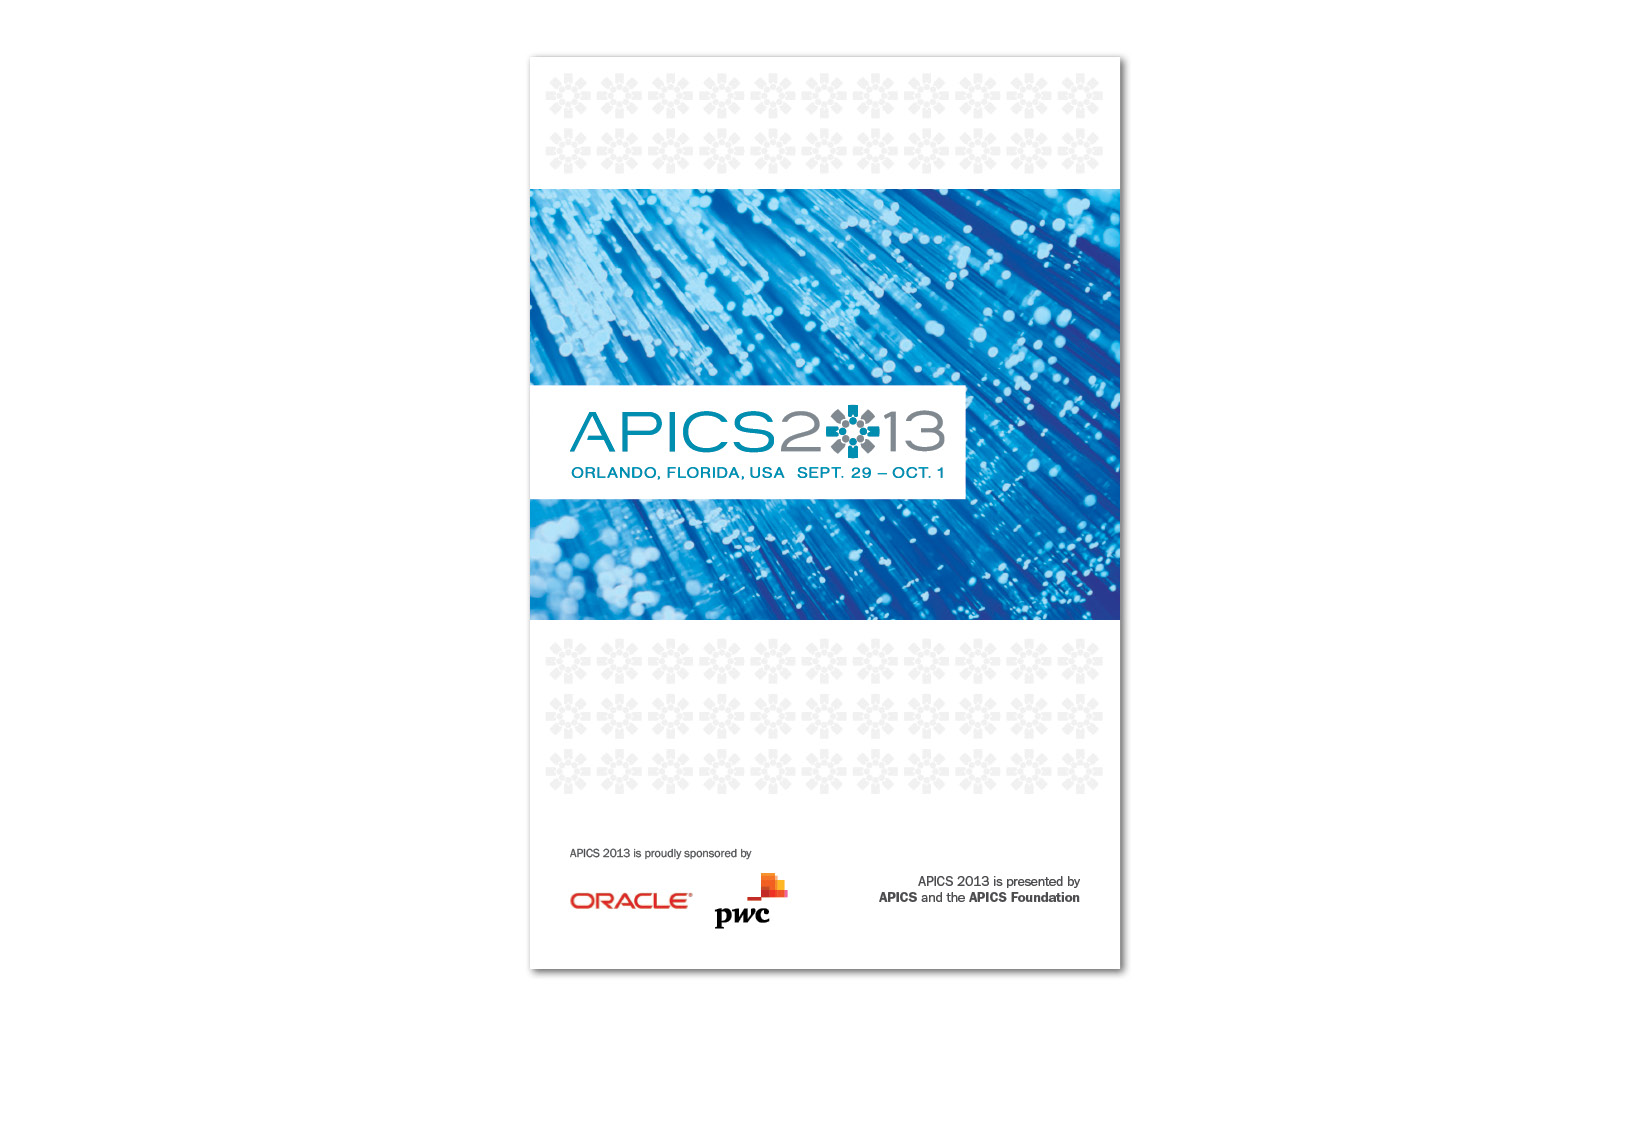  Final program for APICS 2013. Pages include fold out map of conference center, schedule and session descriptions. 